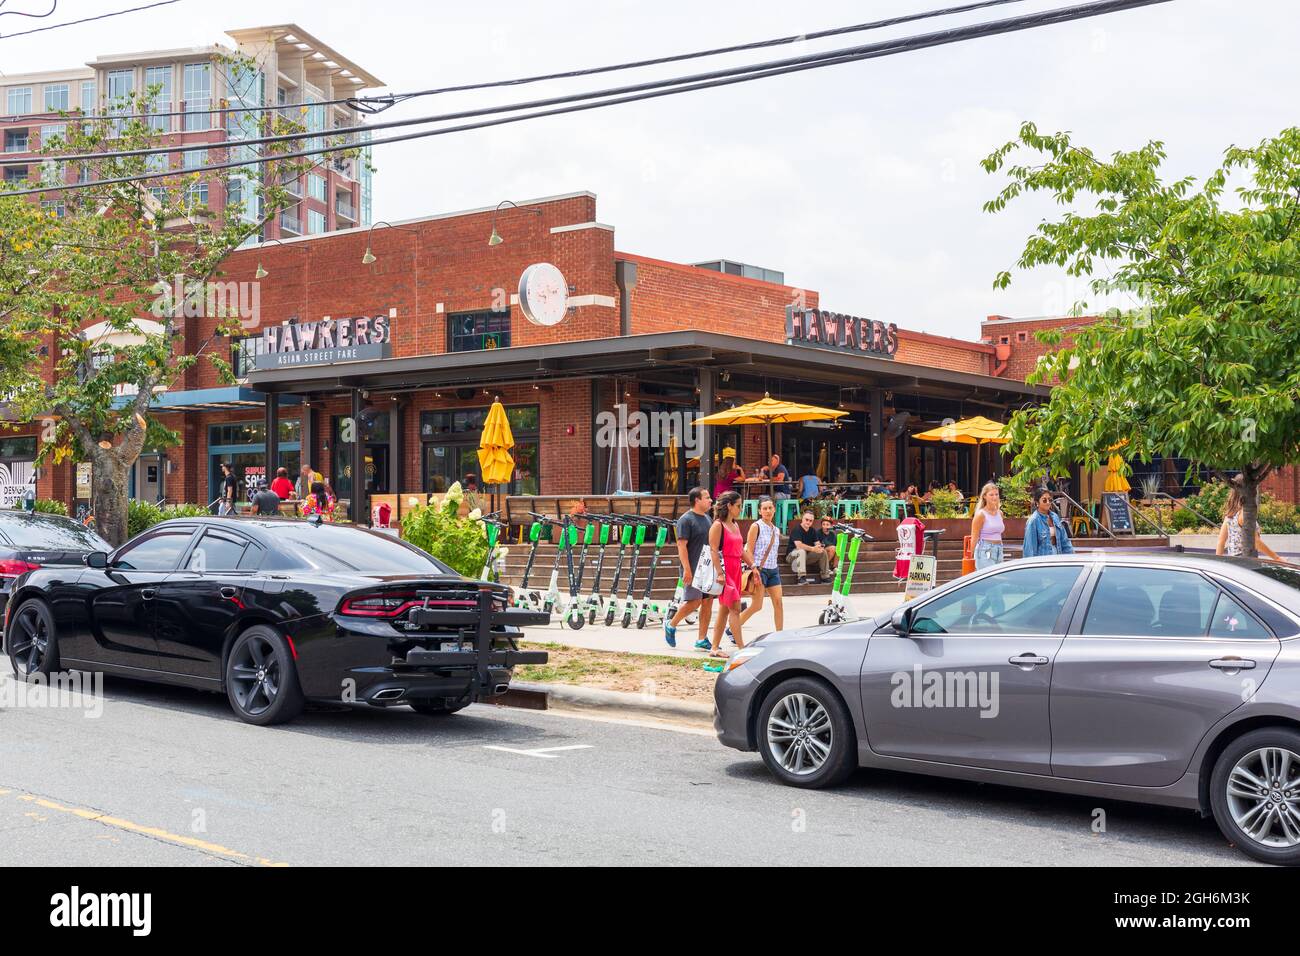 CHARLOTTE, NC, USA-25 JULY 2021: Hawkers Asian Street Fare in South end with people walking by and others dining on veranda. Stock Photo